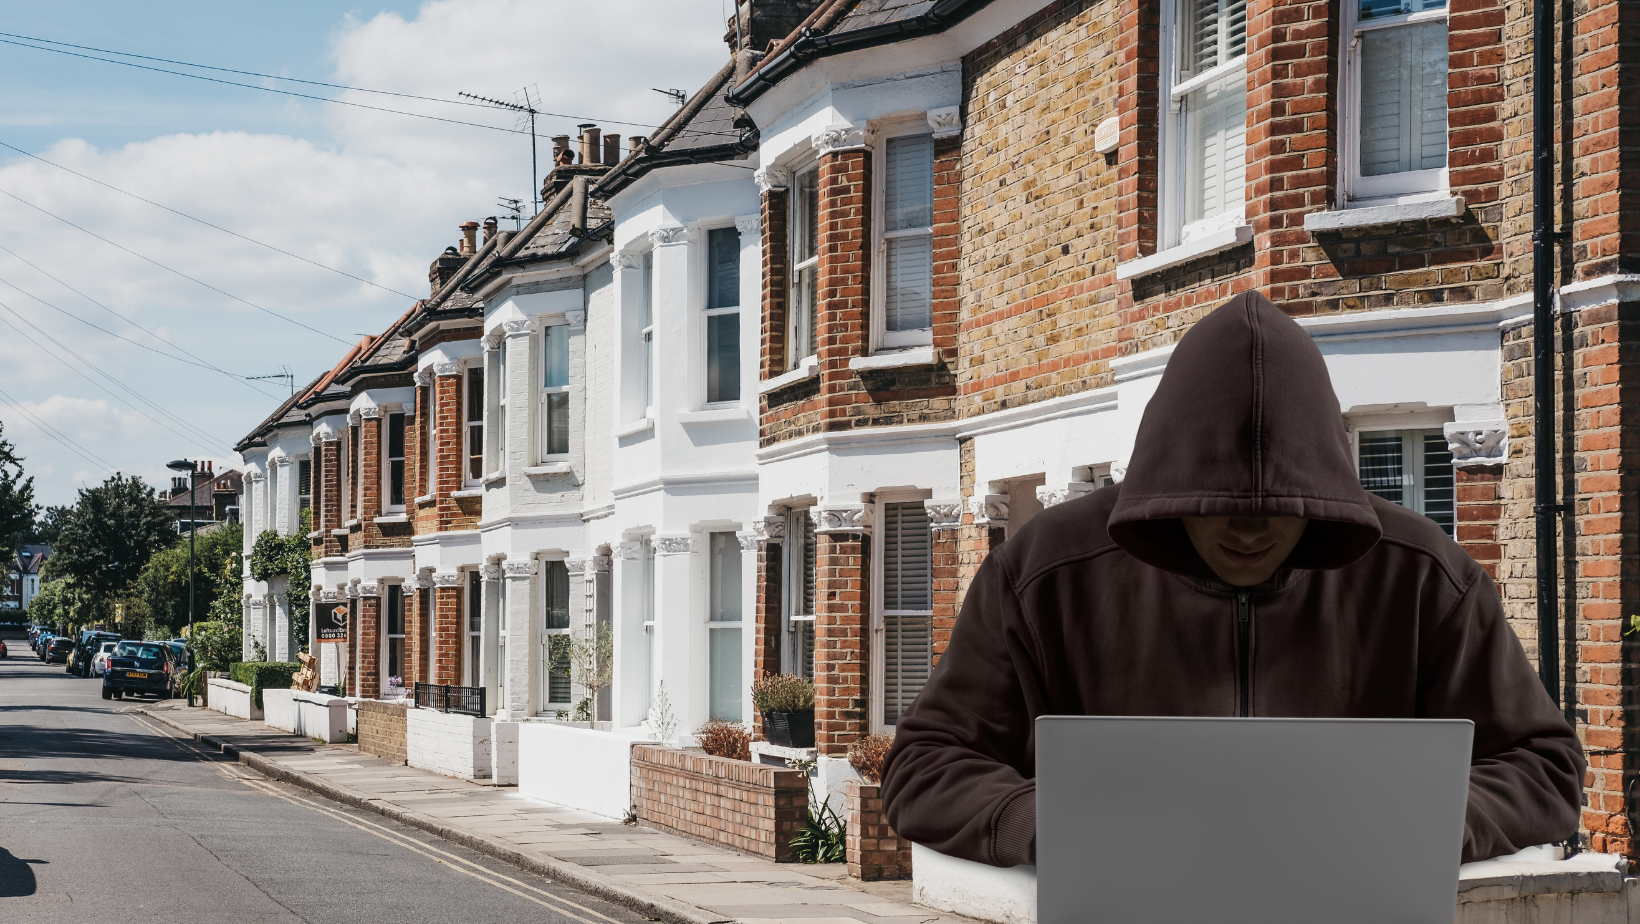 Is Your Property Registered? There’s A New Type Of Theft Around…